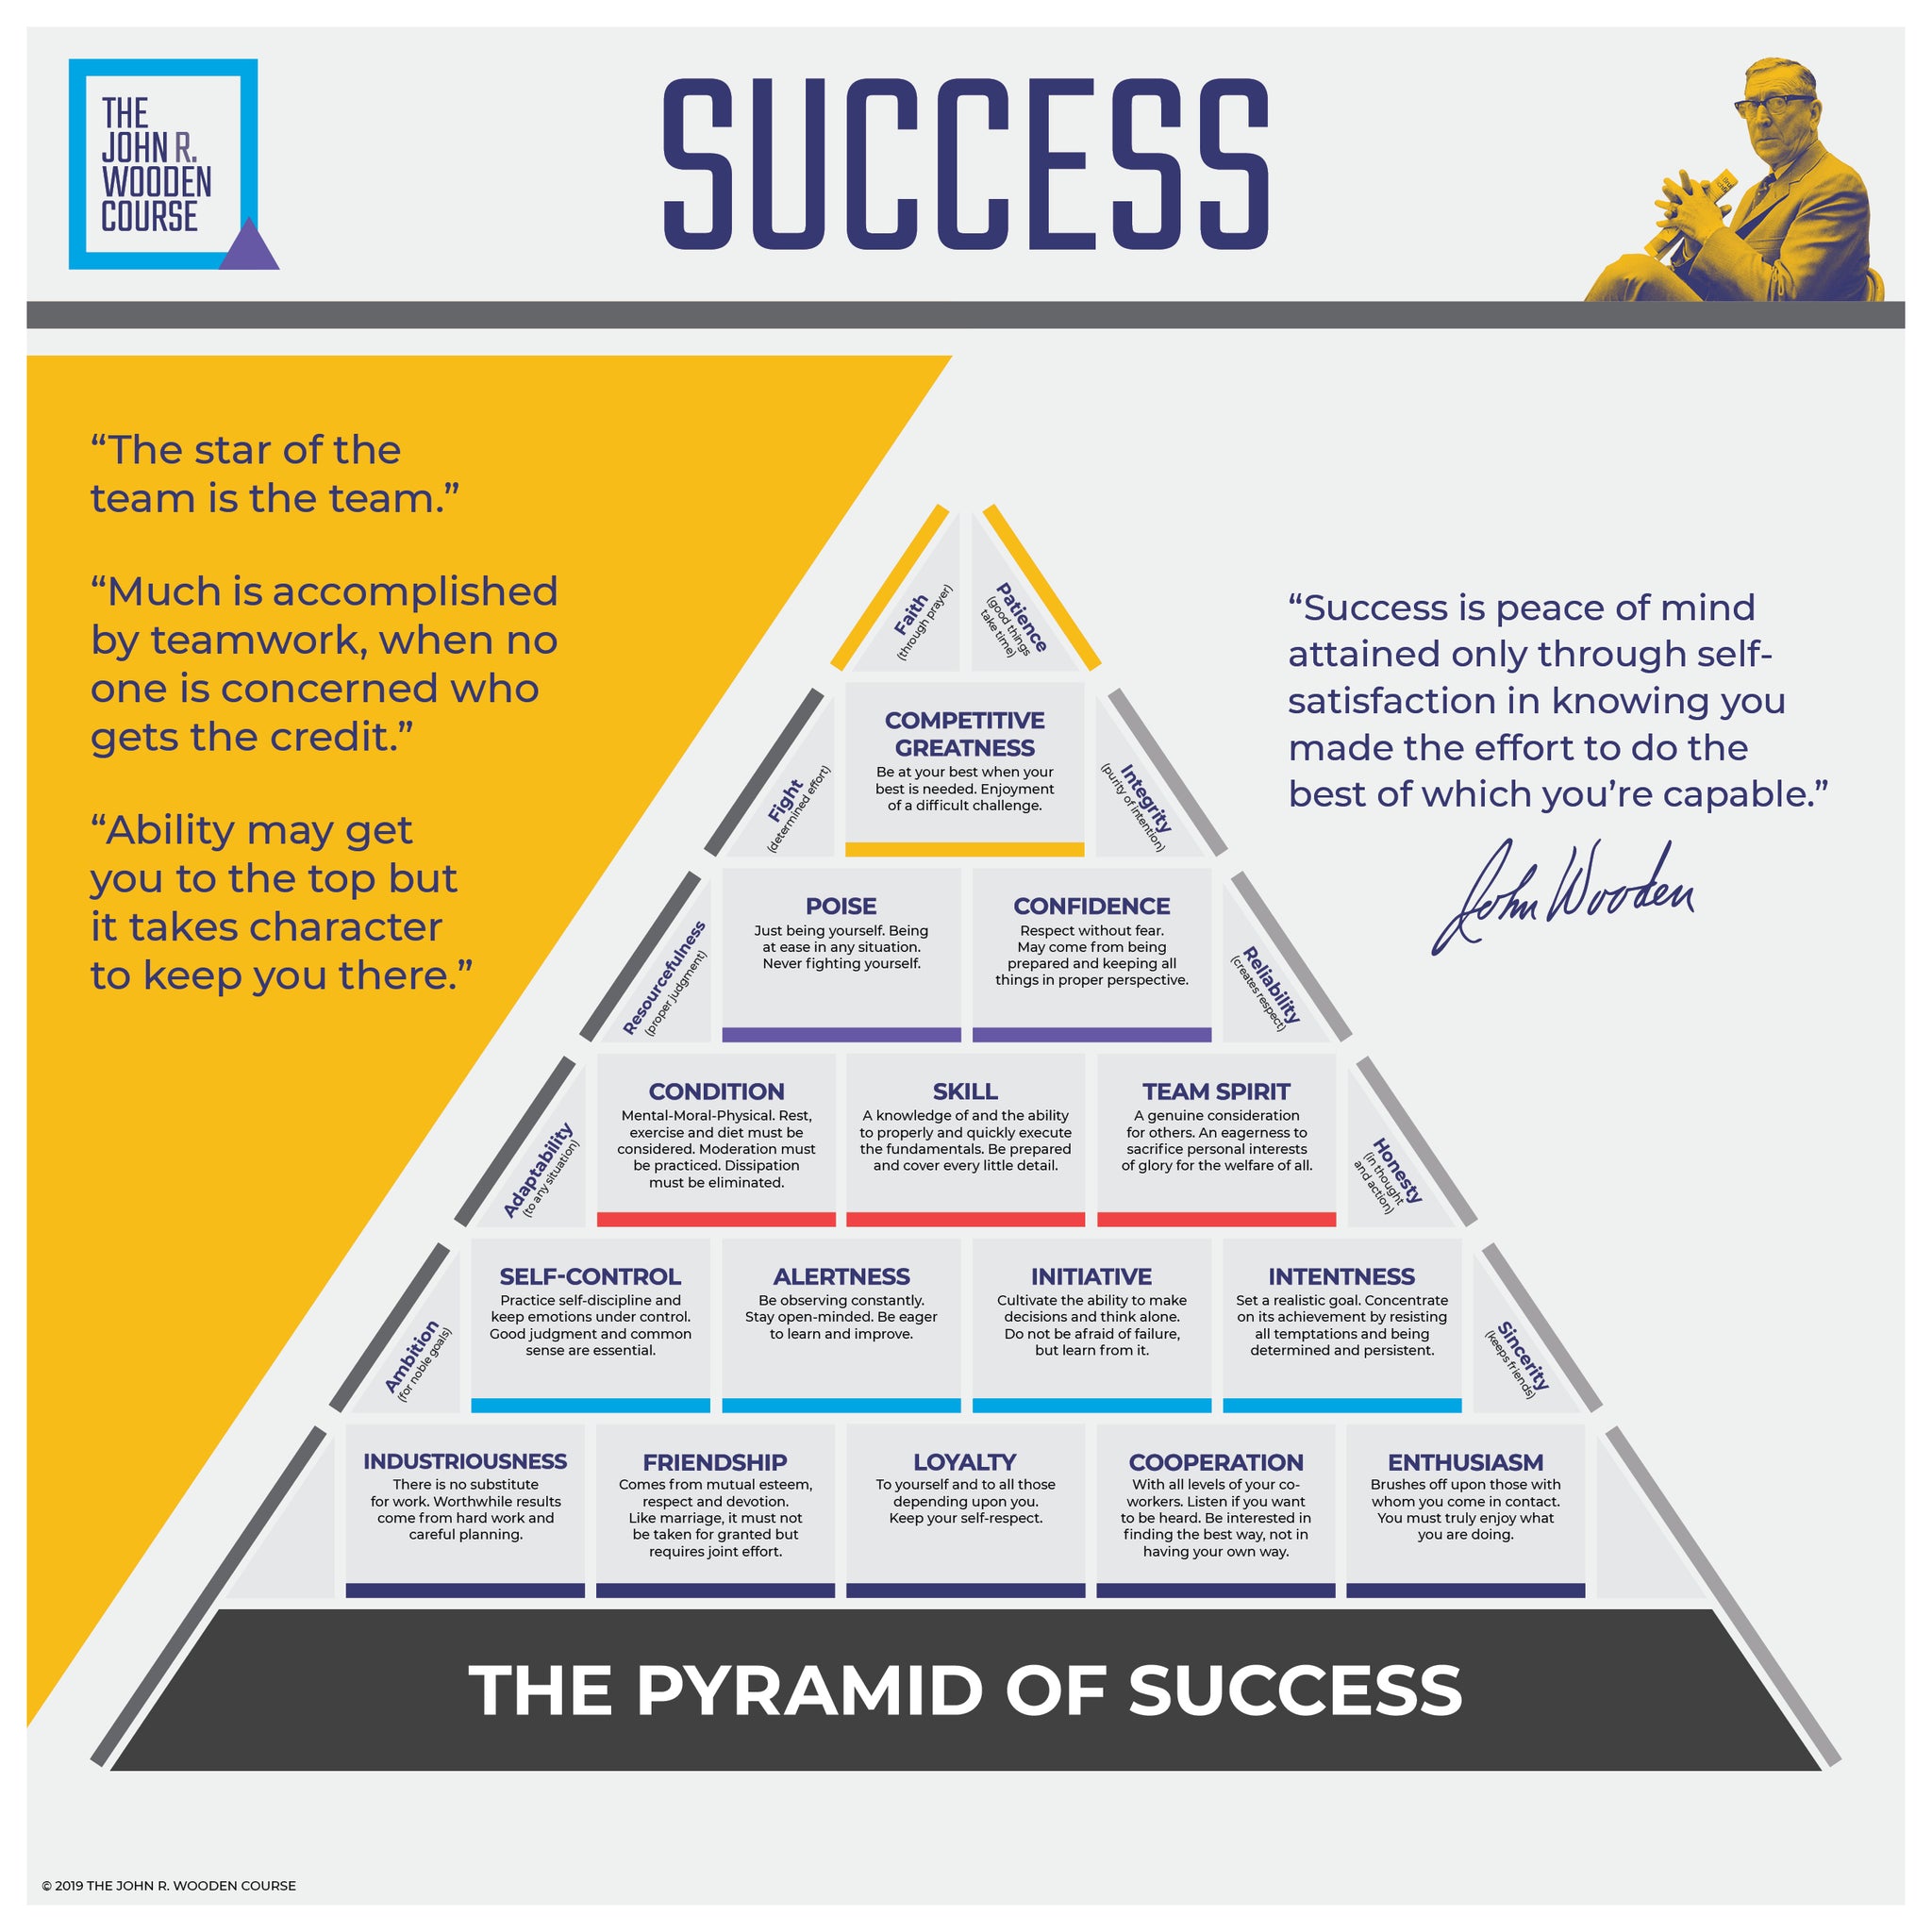 John R. Wooden Course Pyramid of Success Team fathead wall poster